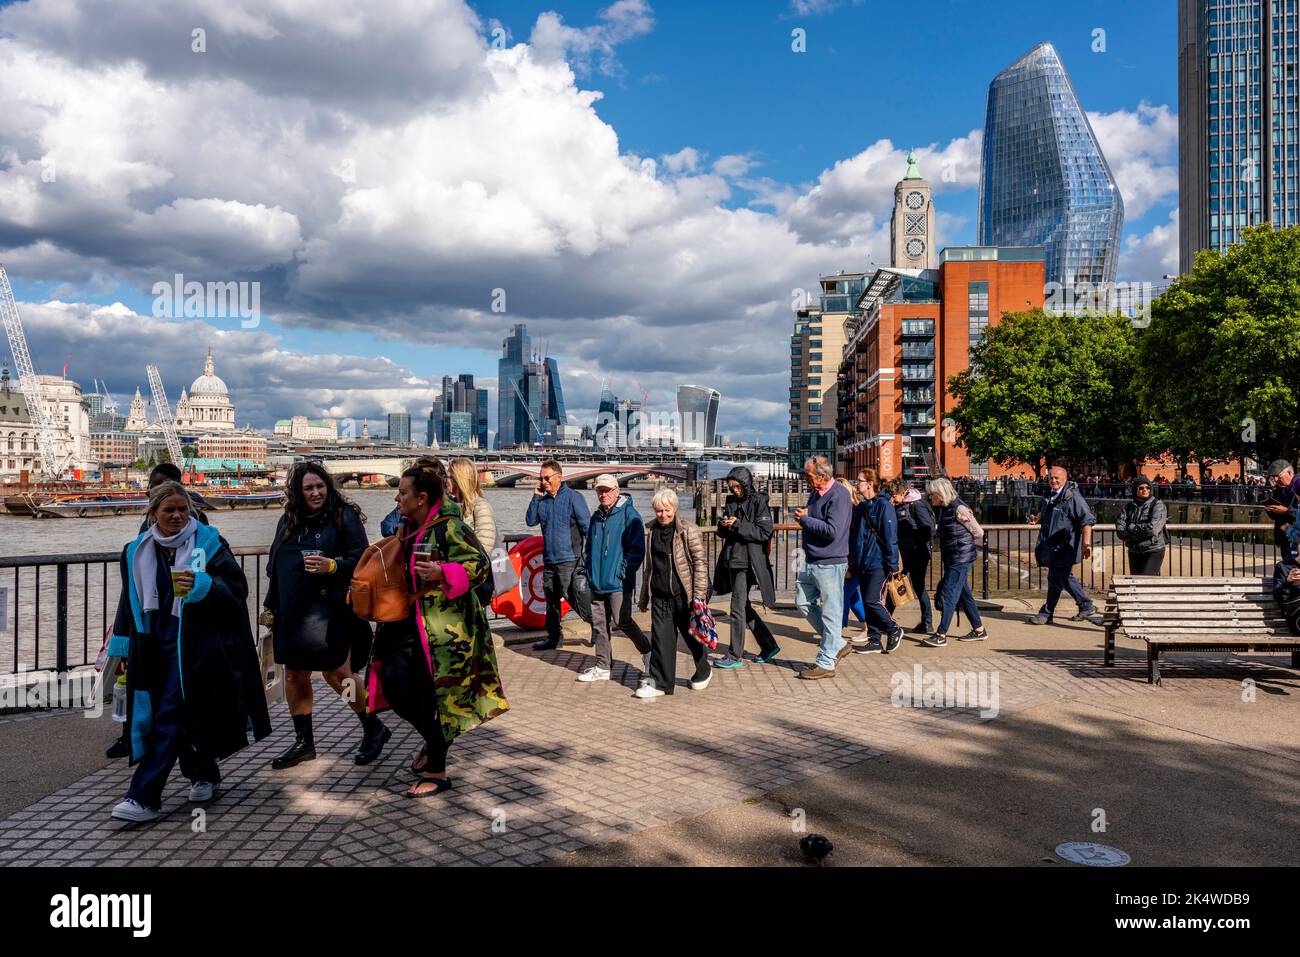 British People and People From Around The World Queue Along The ...